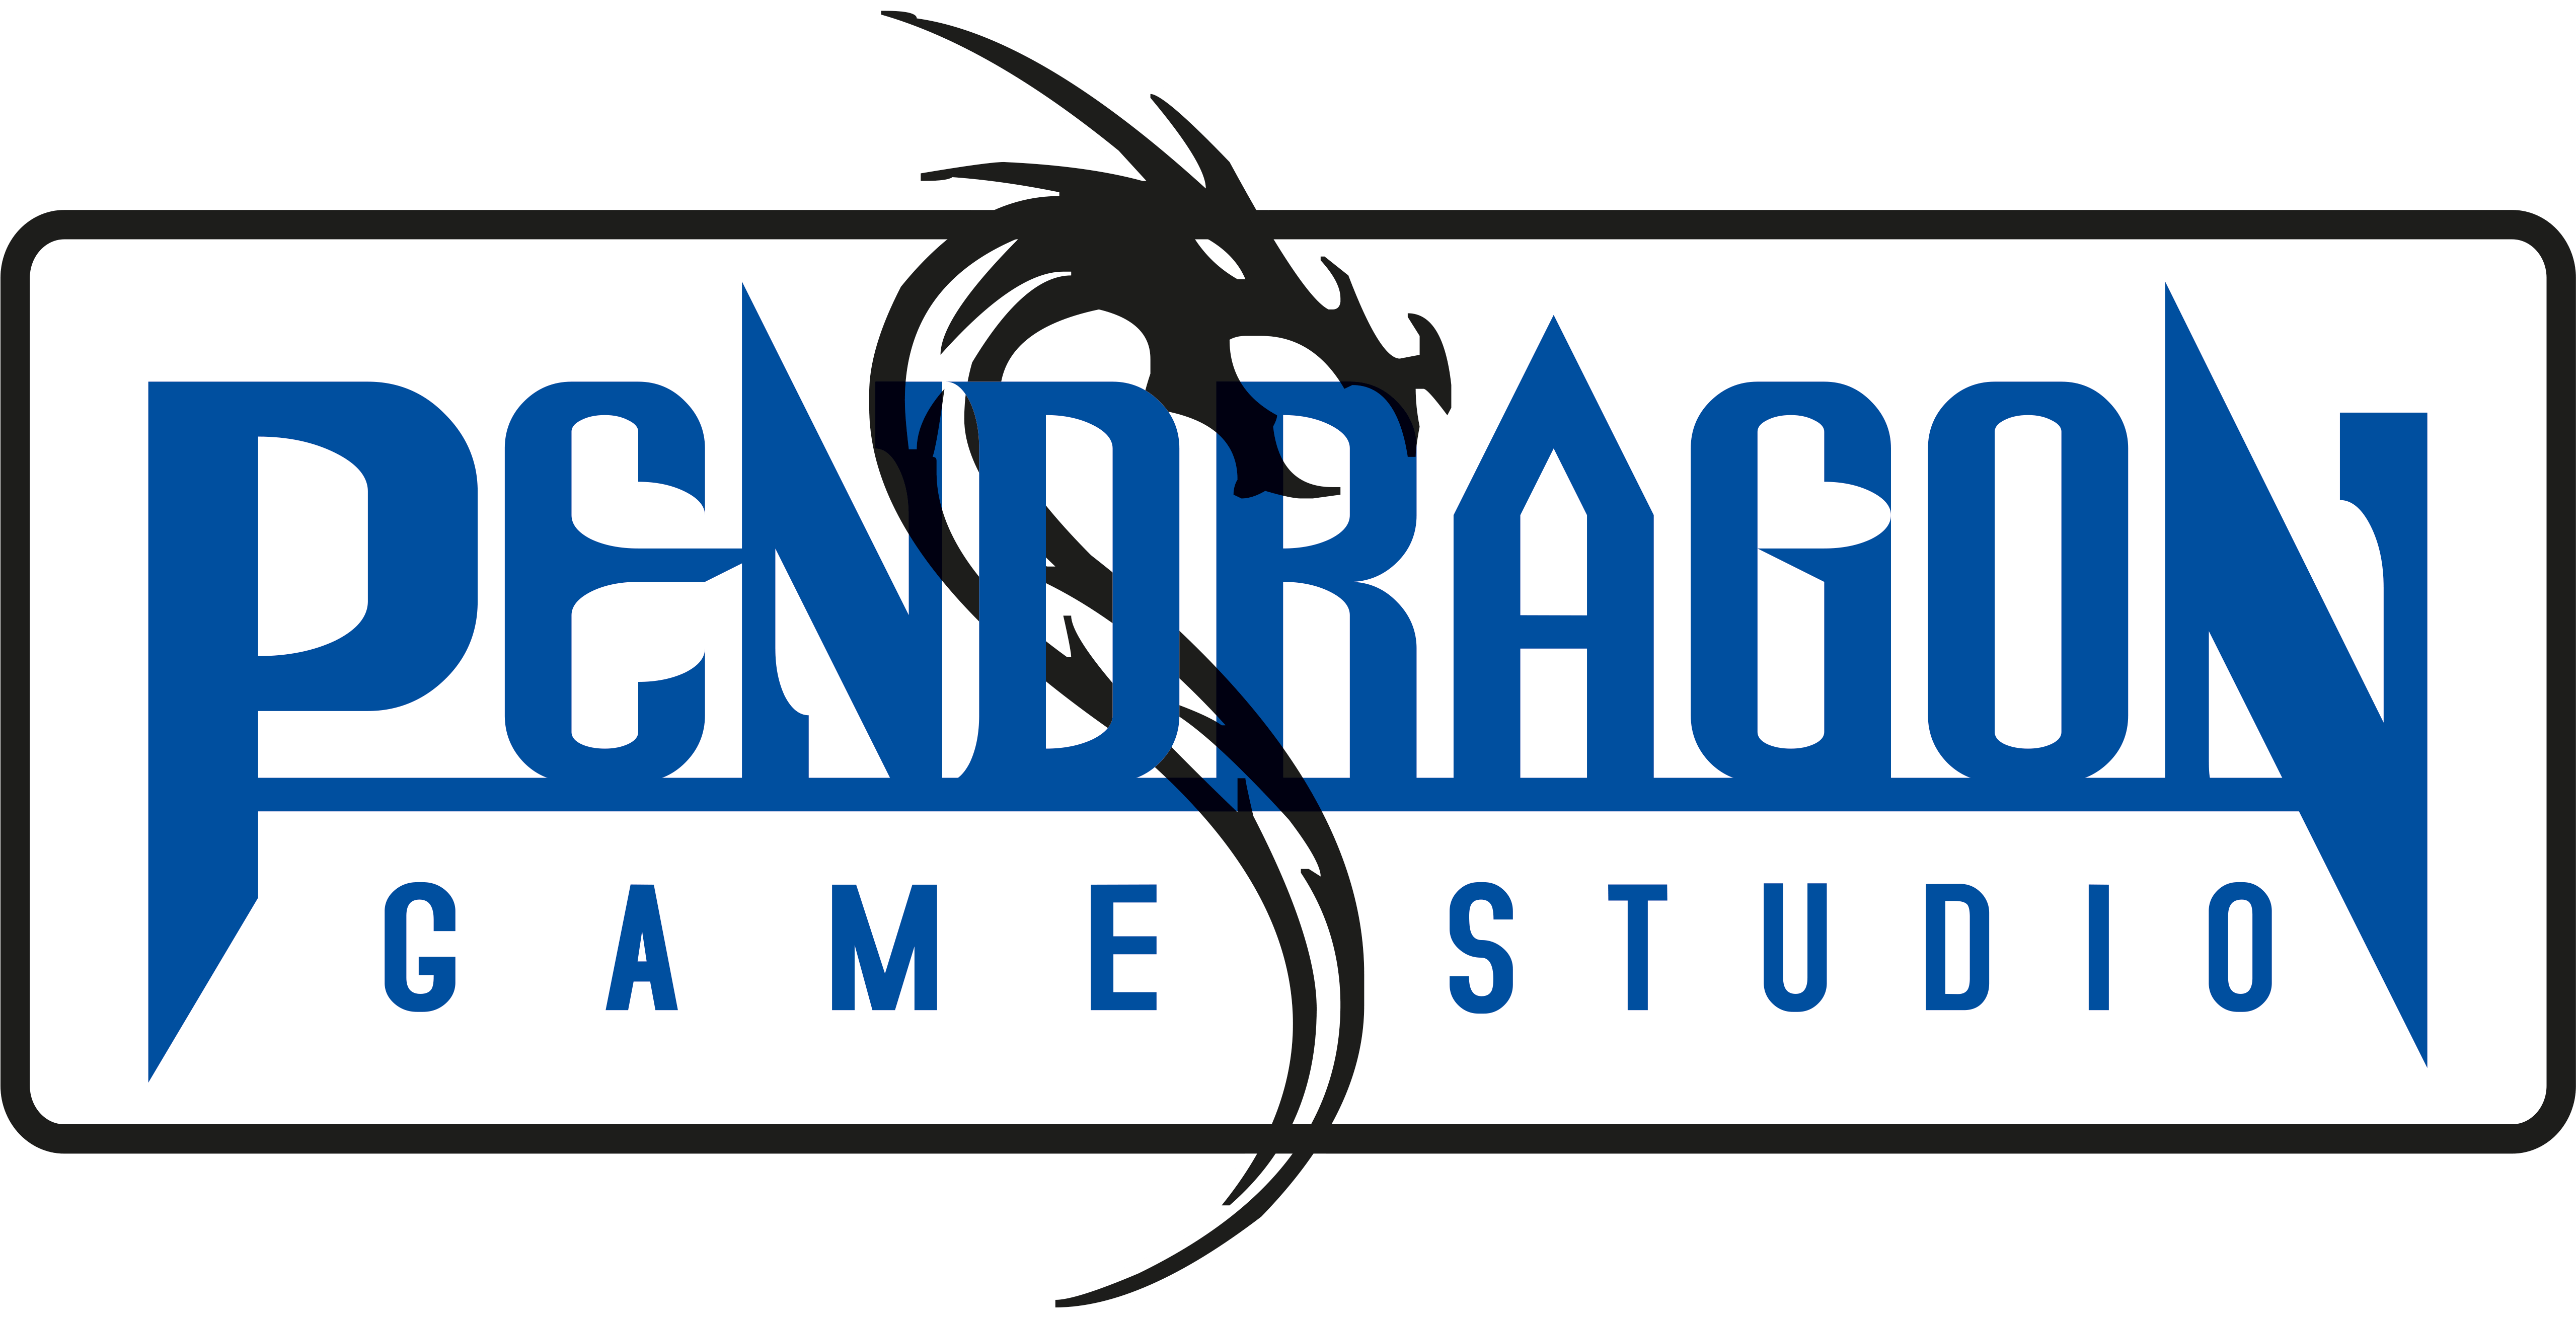 This is the company logo/link of our partner Pendragon Game Studio